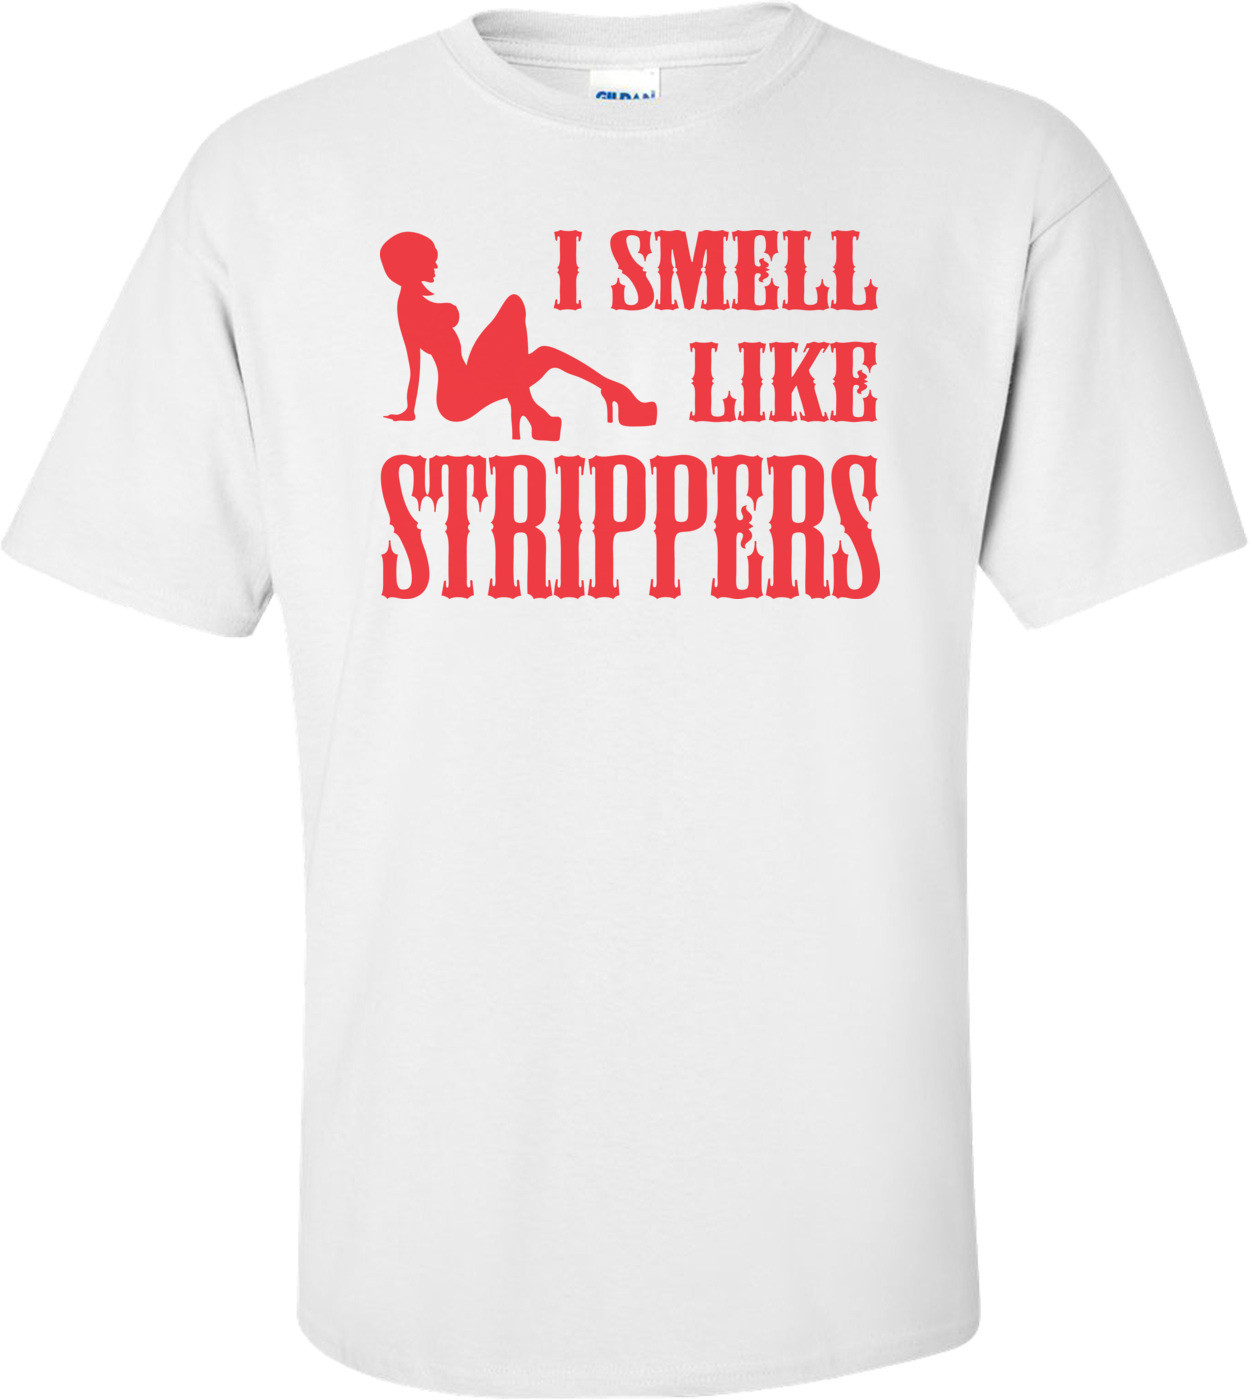 I Smell Like Strippers T-shirt